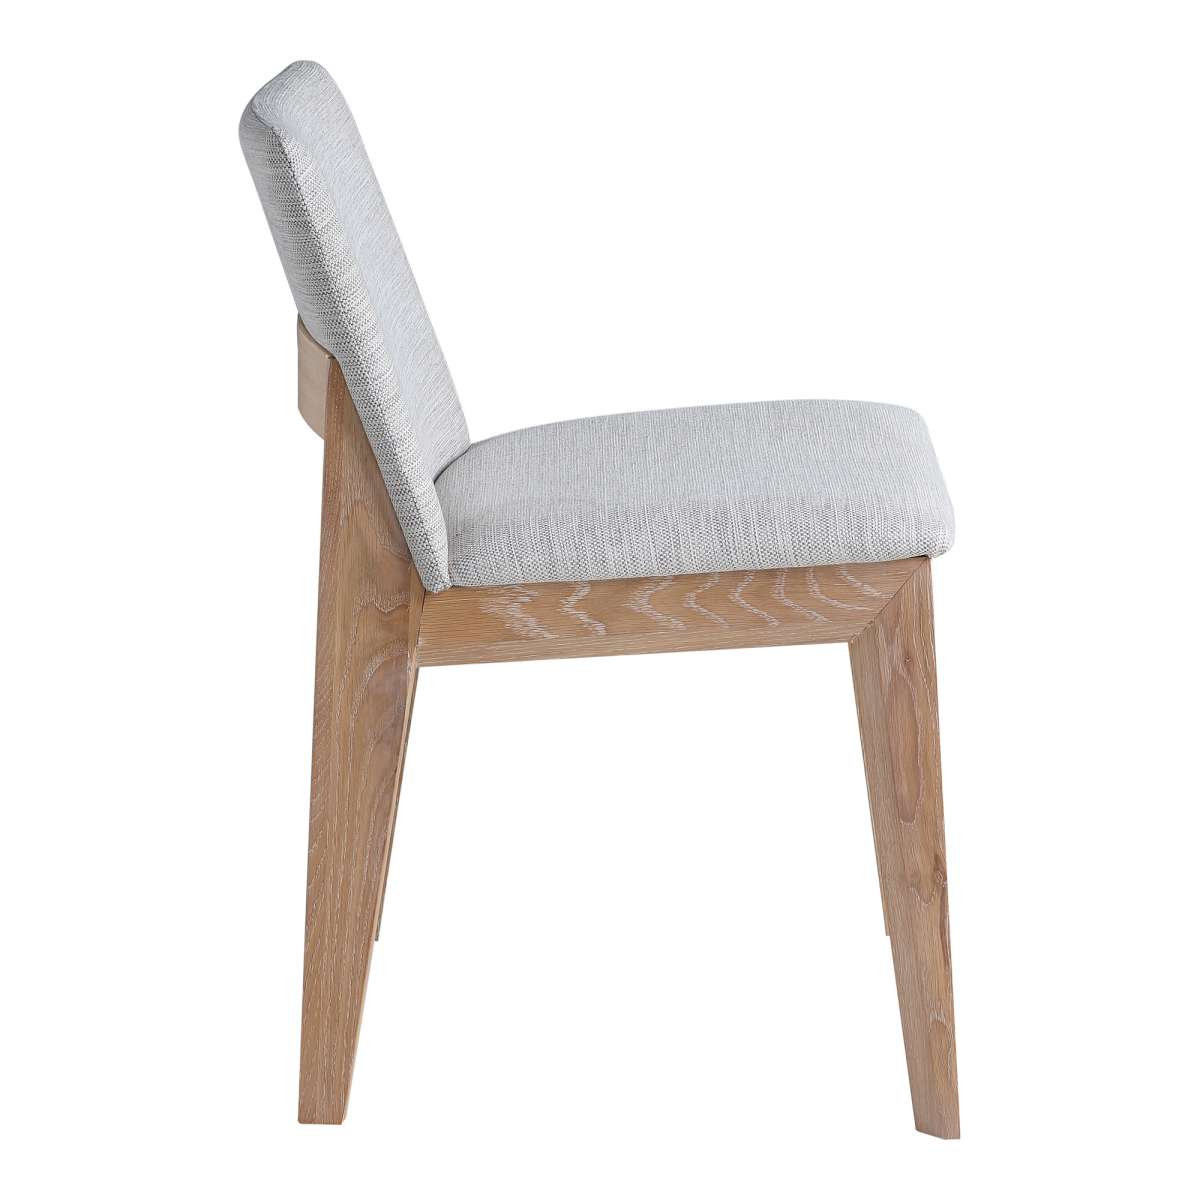 Deco Oak Dining Chair White Pvc-M2 (Set Of 2) By Moe's Home Collection